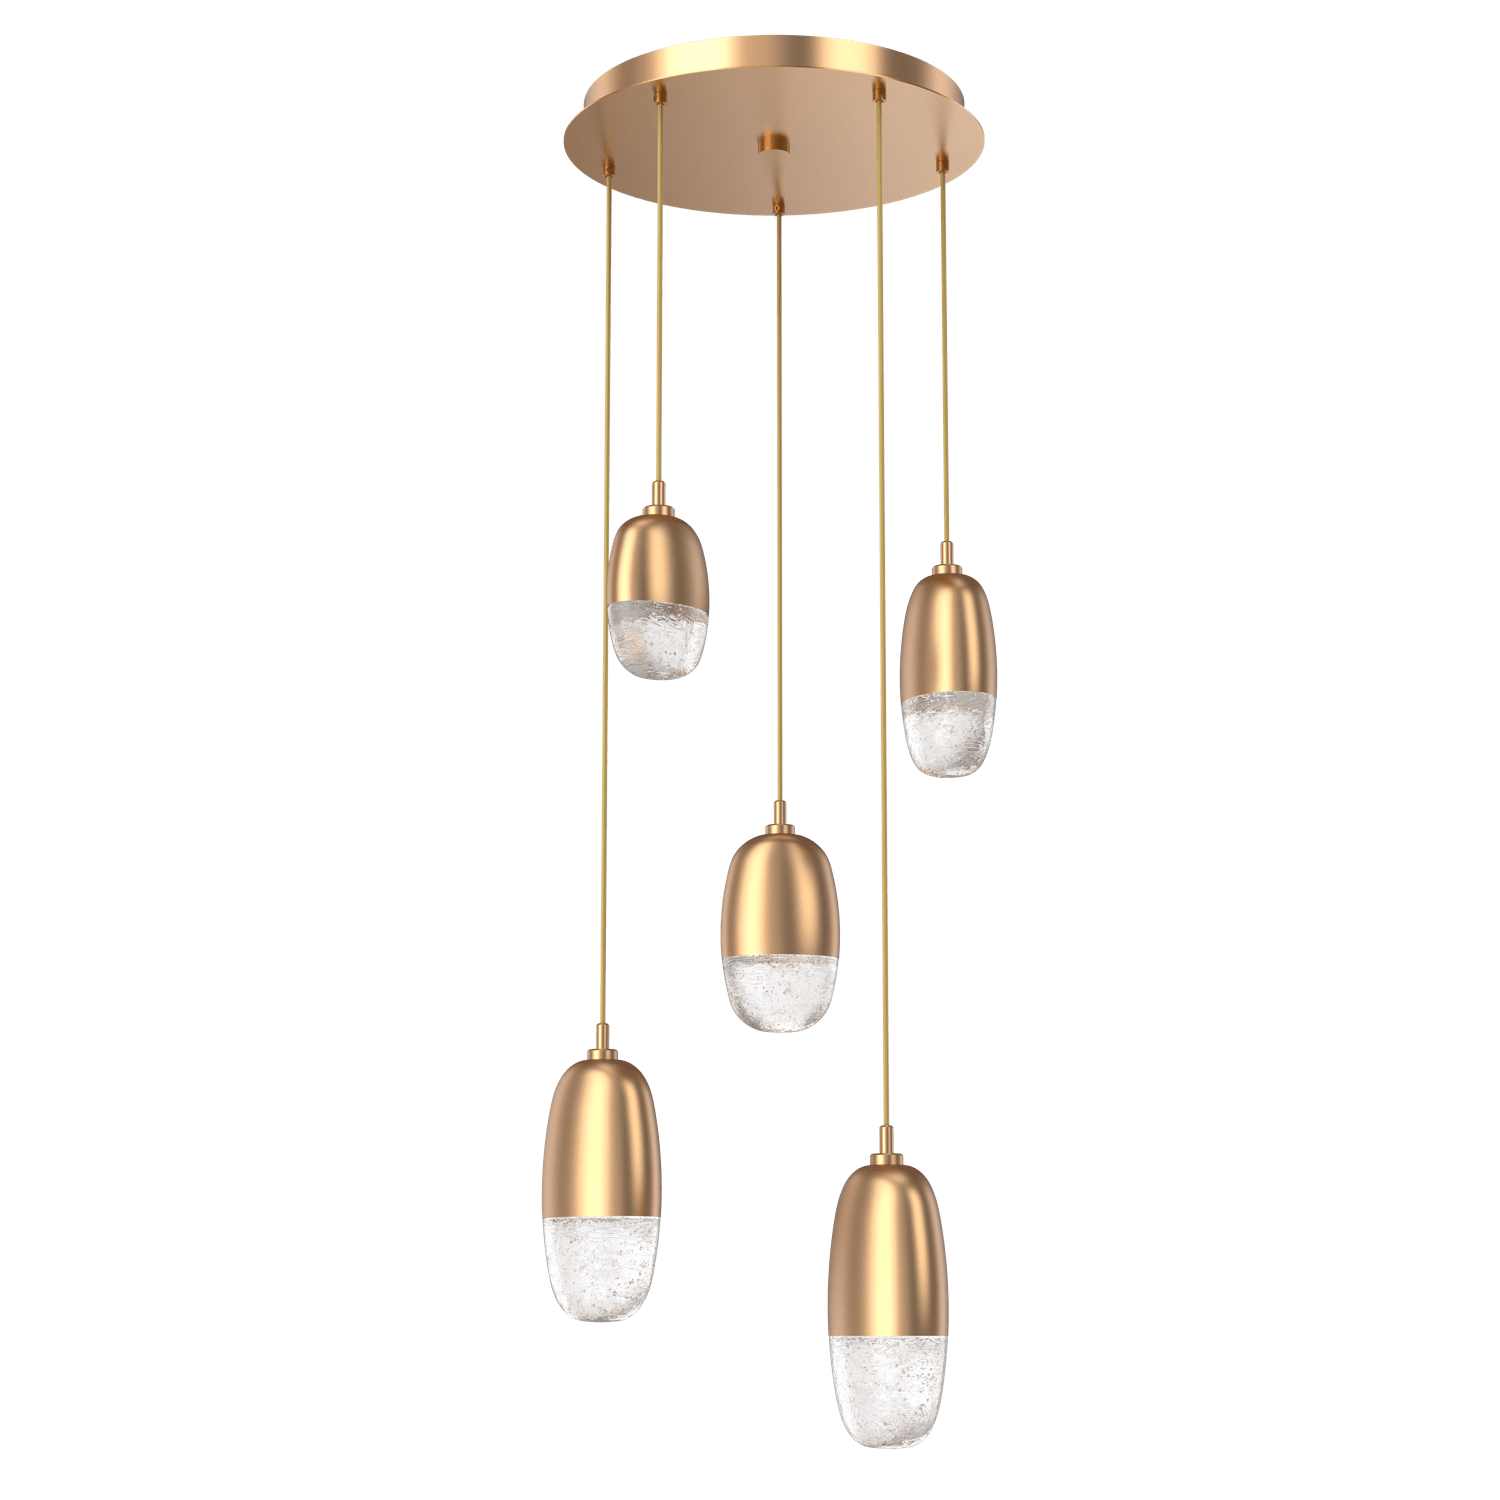 CHB0079-05-NB-Hammerton-Studio-Pebble-5-light-round-pendant-chandelier-with-novel-brass-finish-and-clear-cast-glass-shades-and-LED-lamping